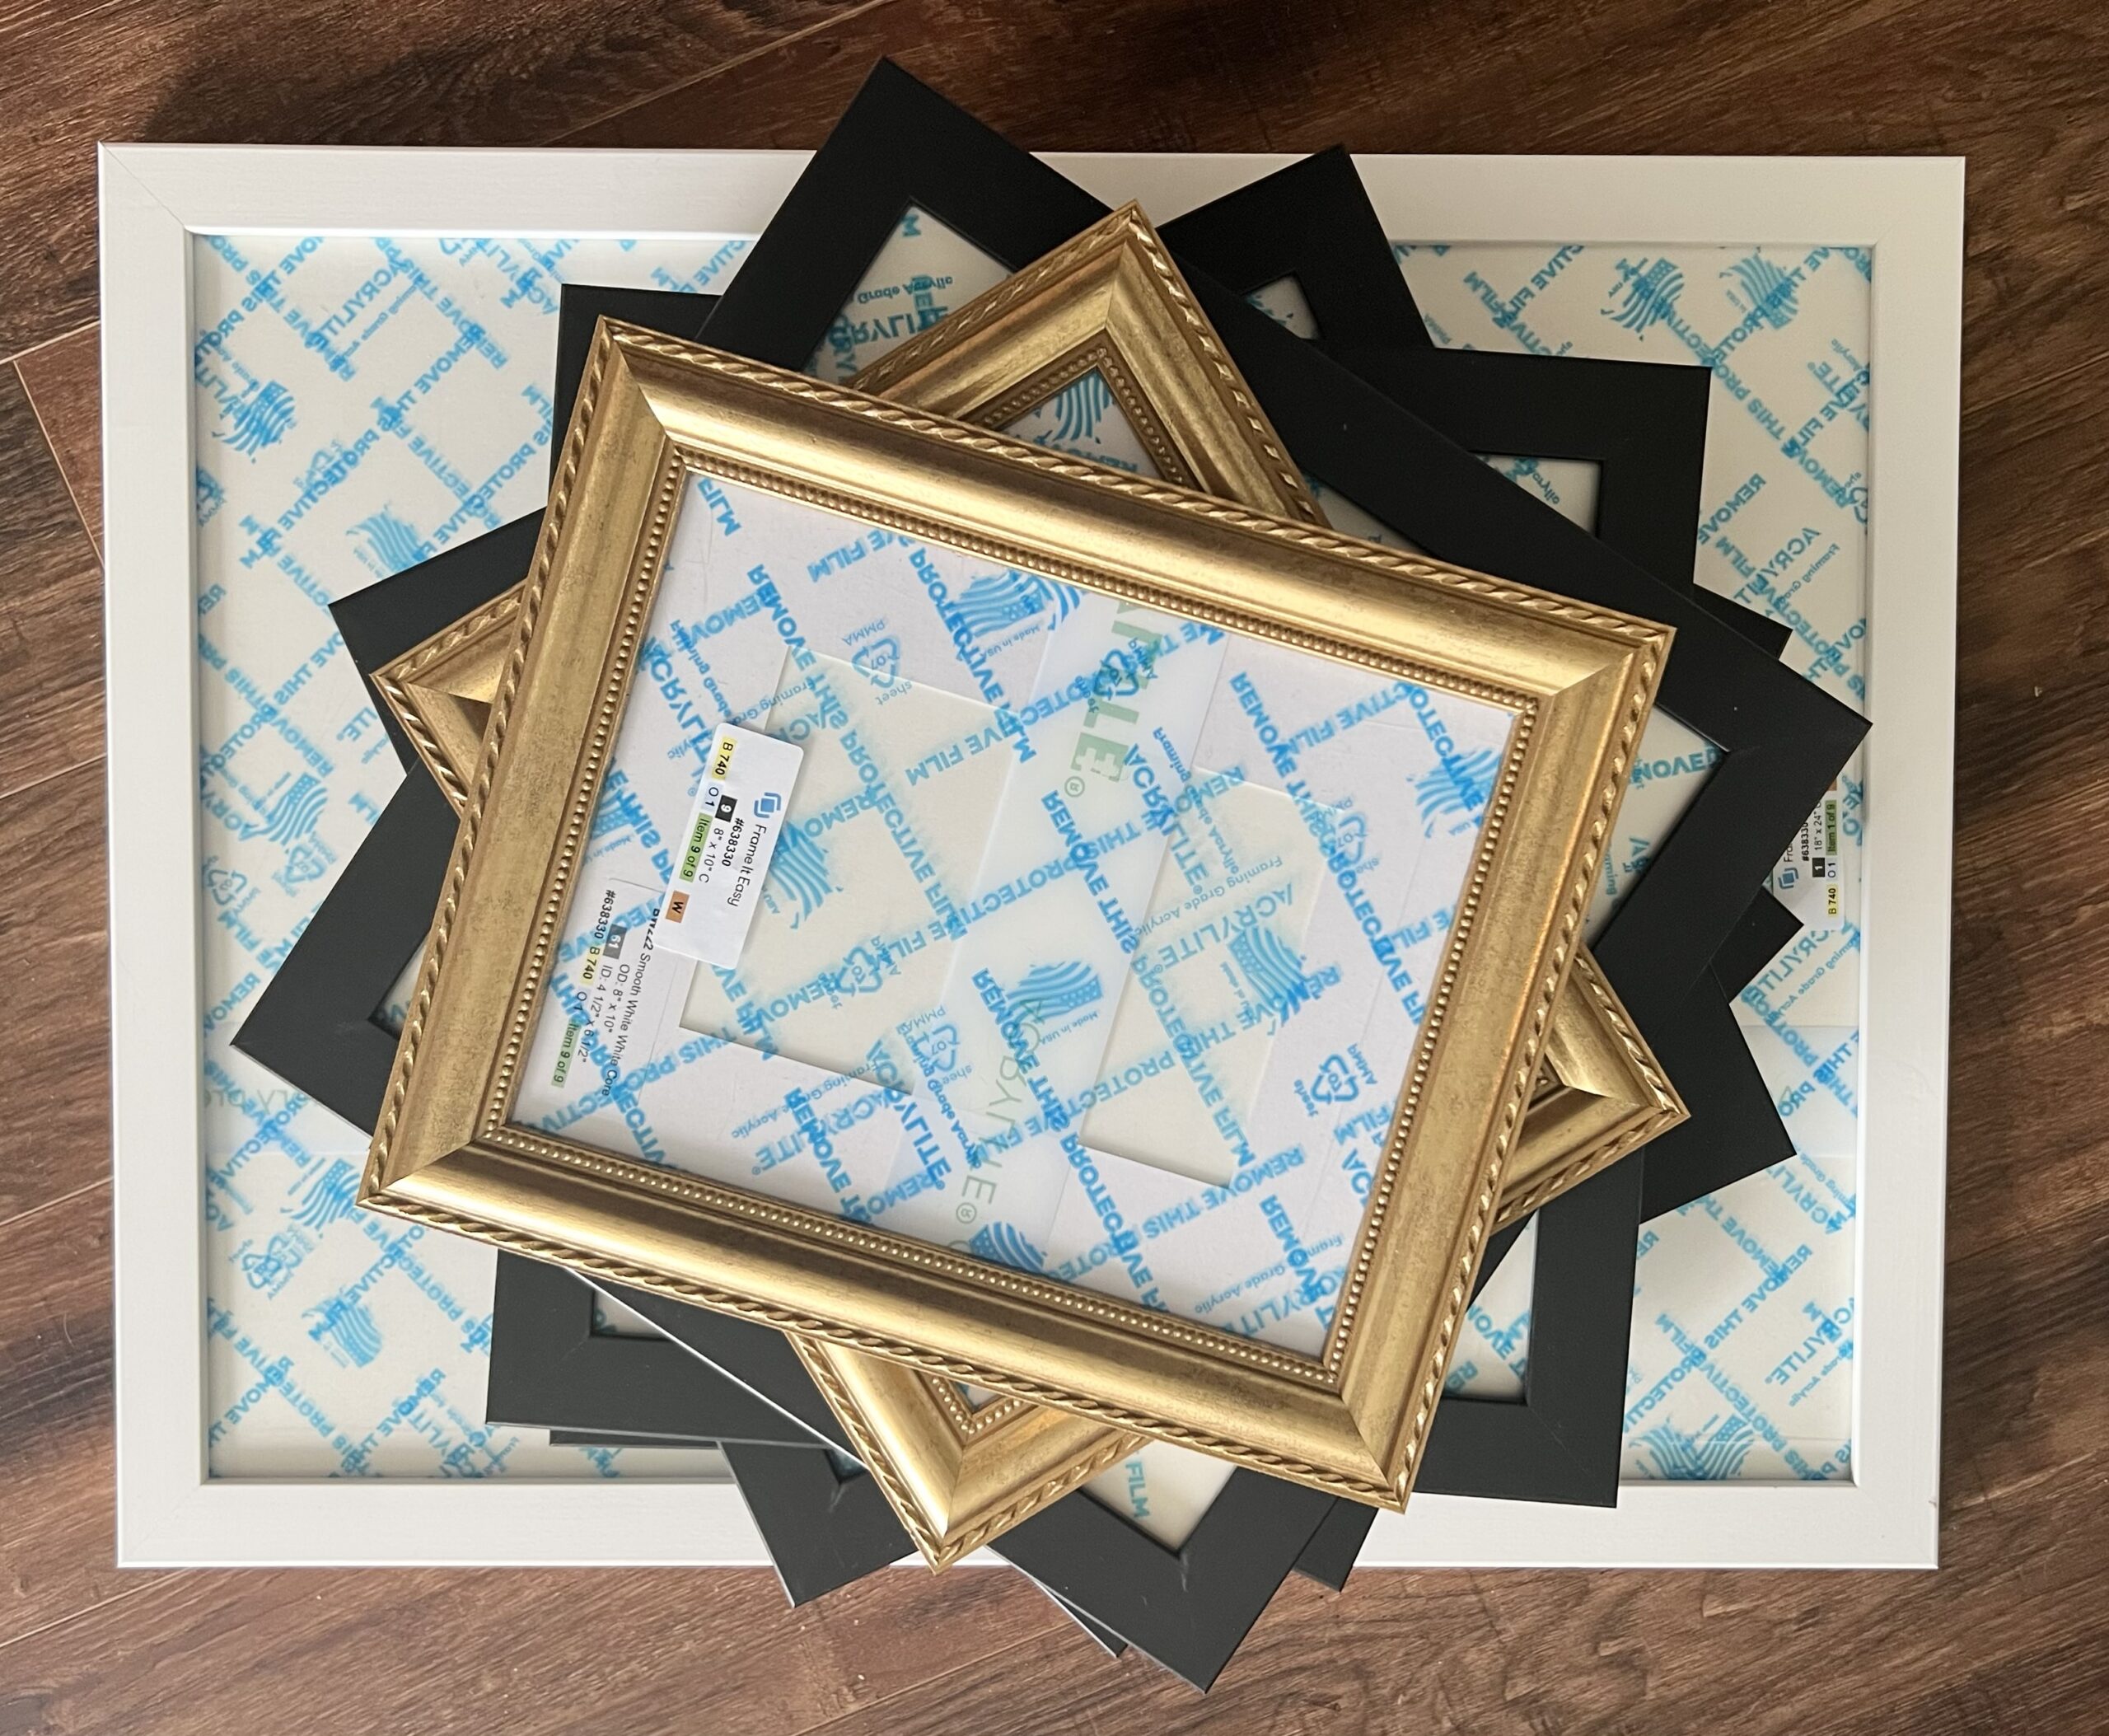 Frame-Tasticly Free Picture Frame Coloring Pages - Frame those coloring pages!